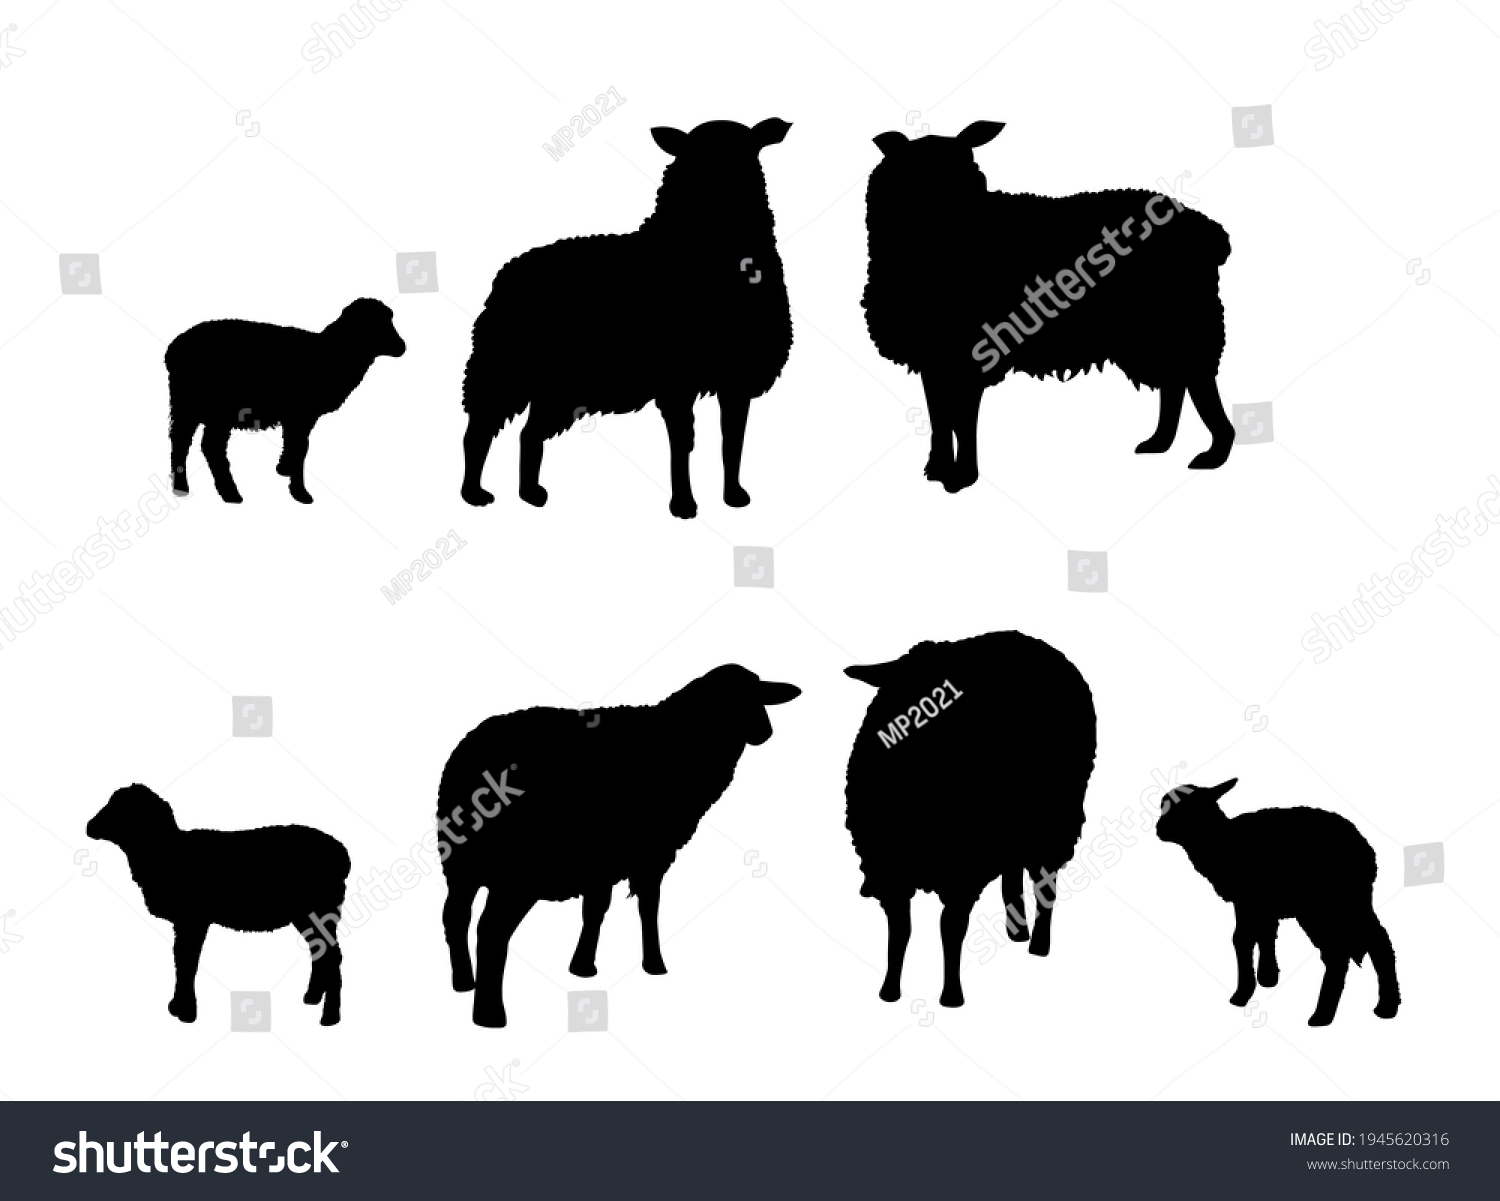 Sheep Silhouette Vector Illustration Isolated On Stock Vector (Royalty ...